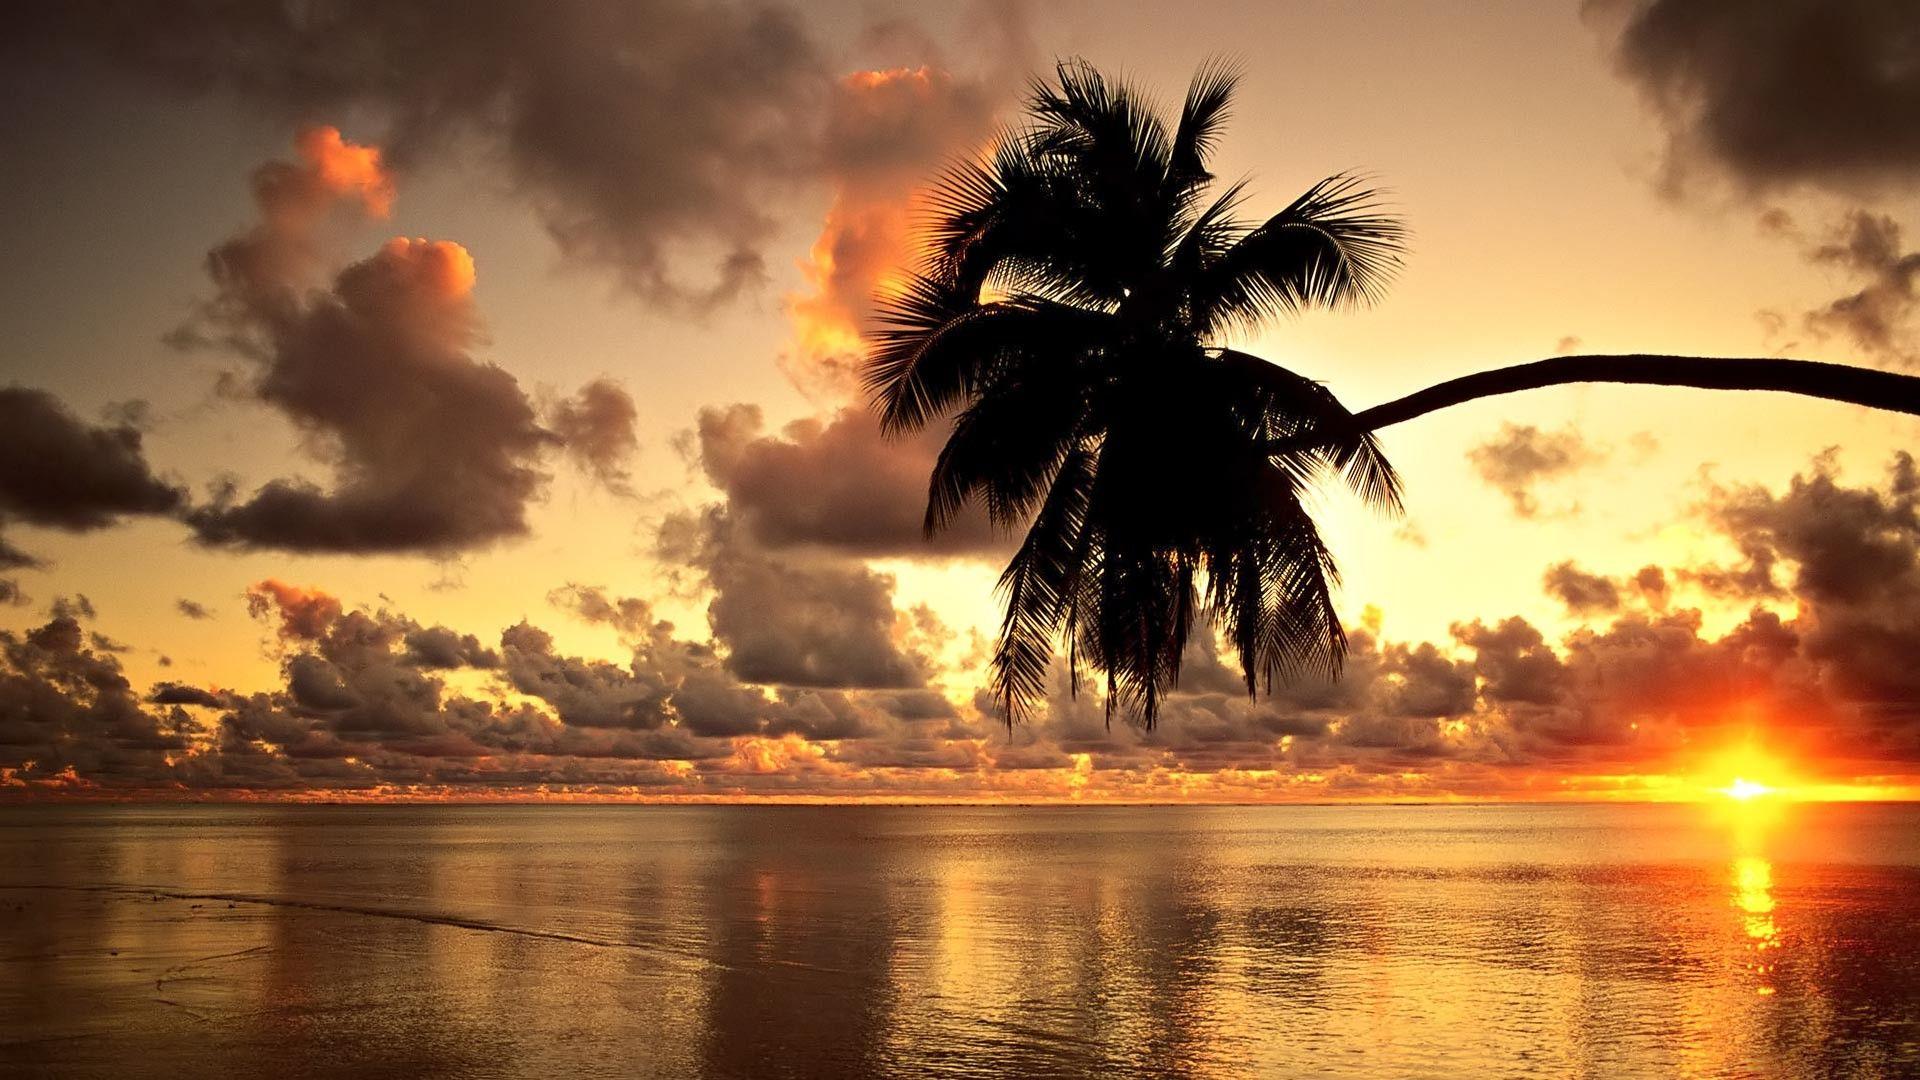 Ocean Sunset With Palm Trees HD Wallpaper, Background Image